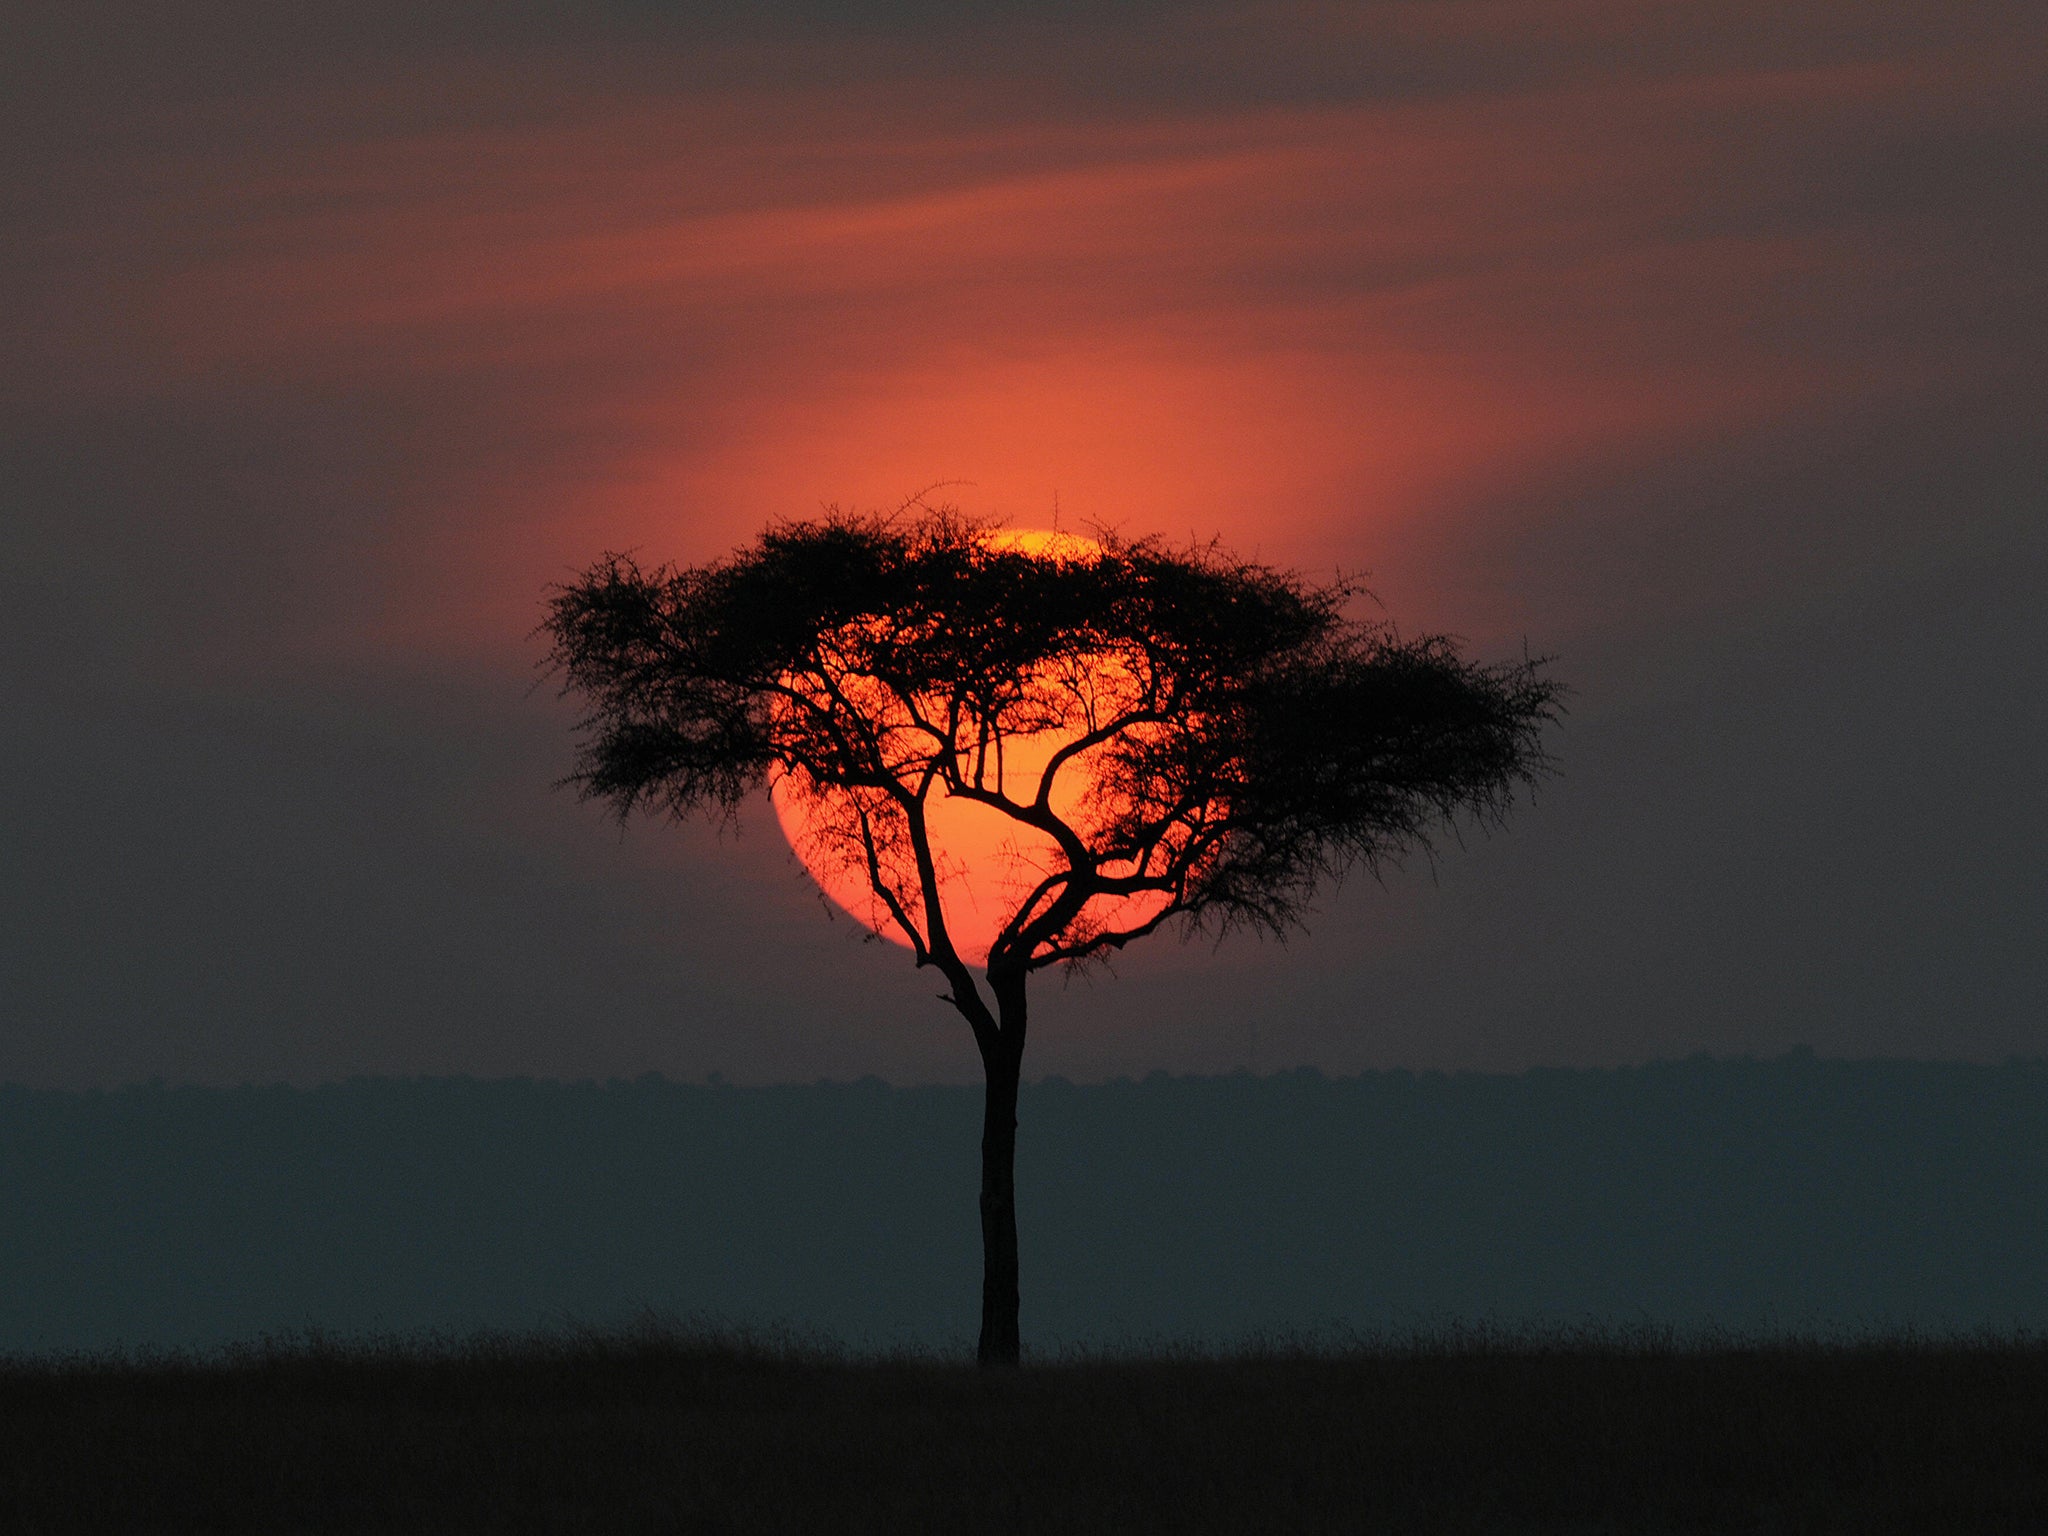 The sun sets over the Olare Orok conservancy within the Masai Mara eco system.